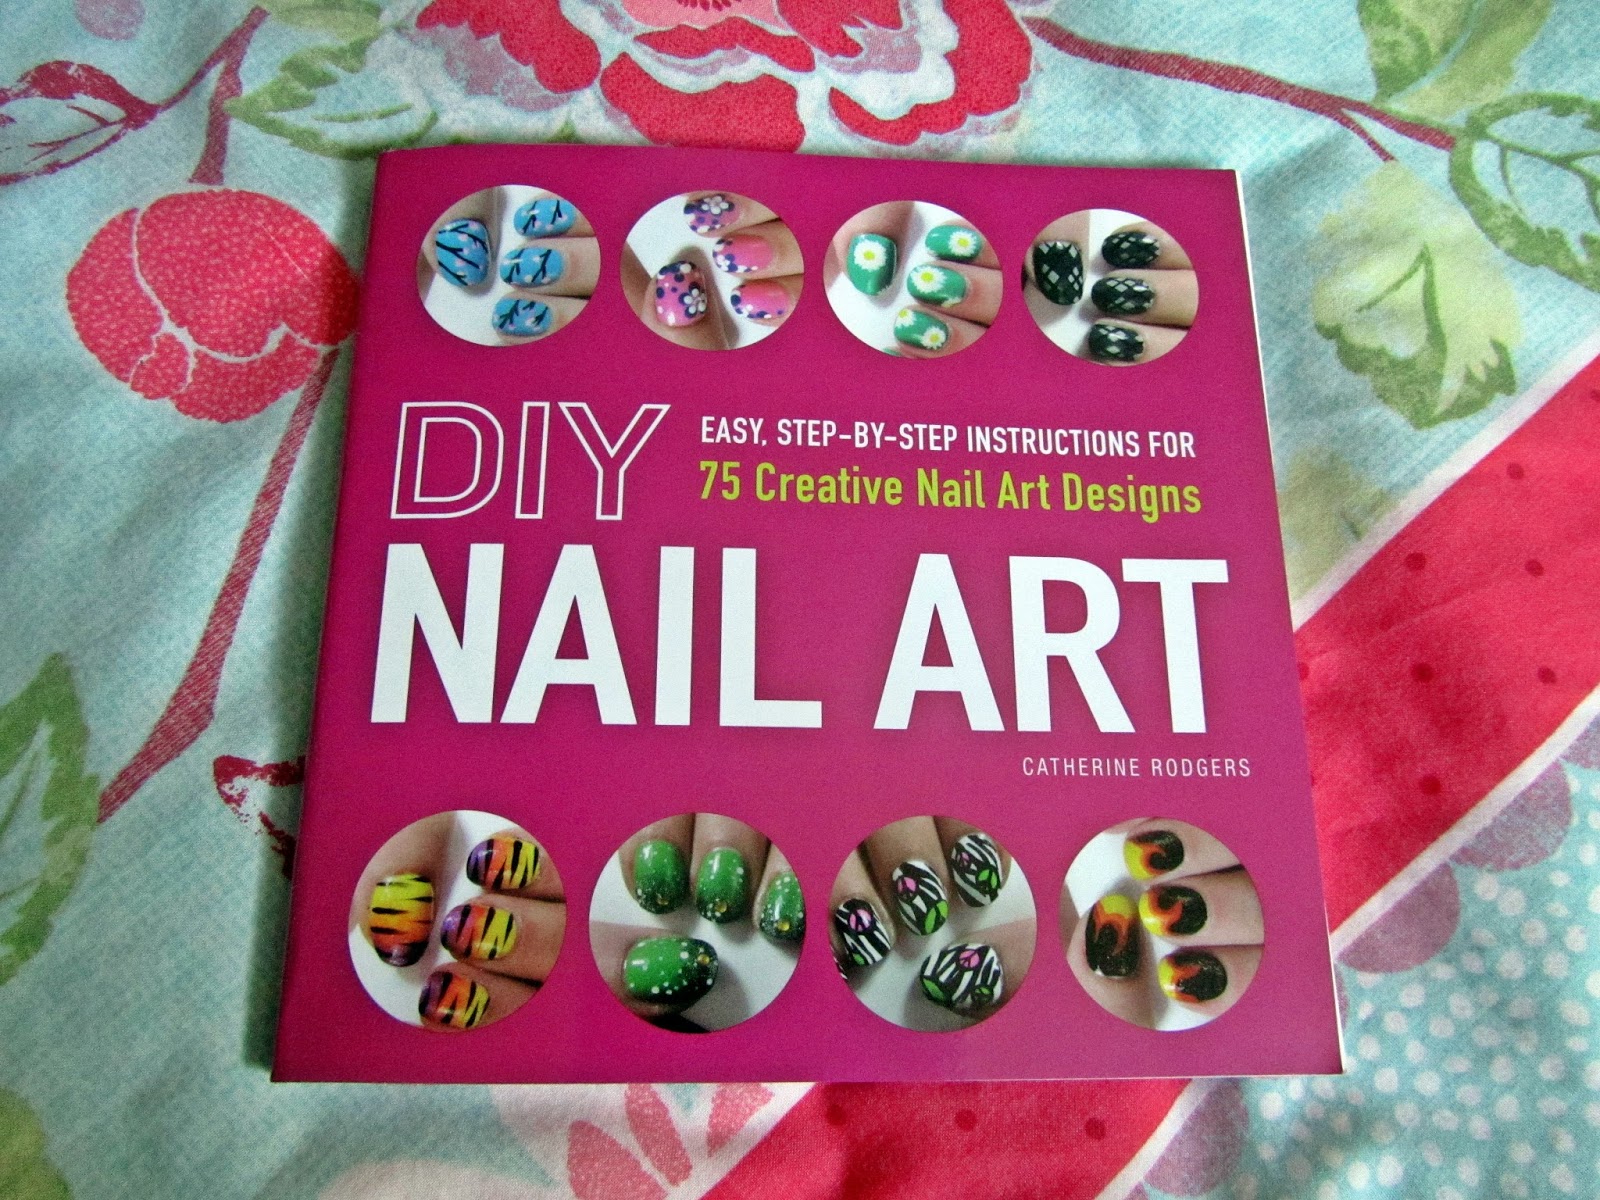 10. Pansy Alexander's Nail Art Book: The Must-Have Guide for Nail Art Lovers - wide 4